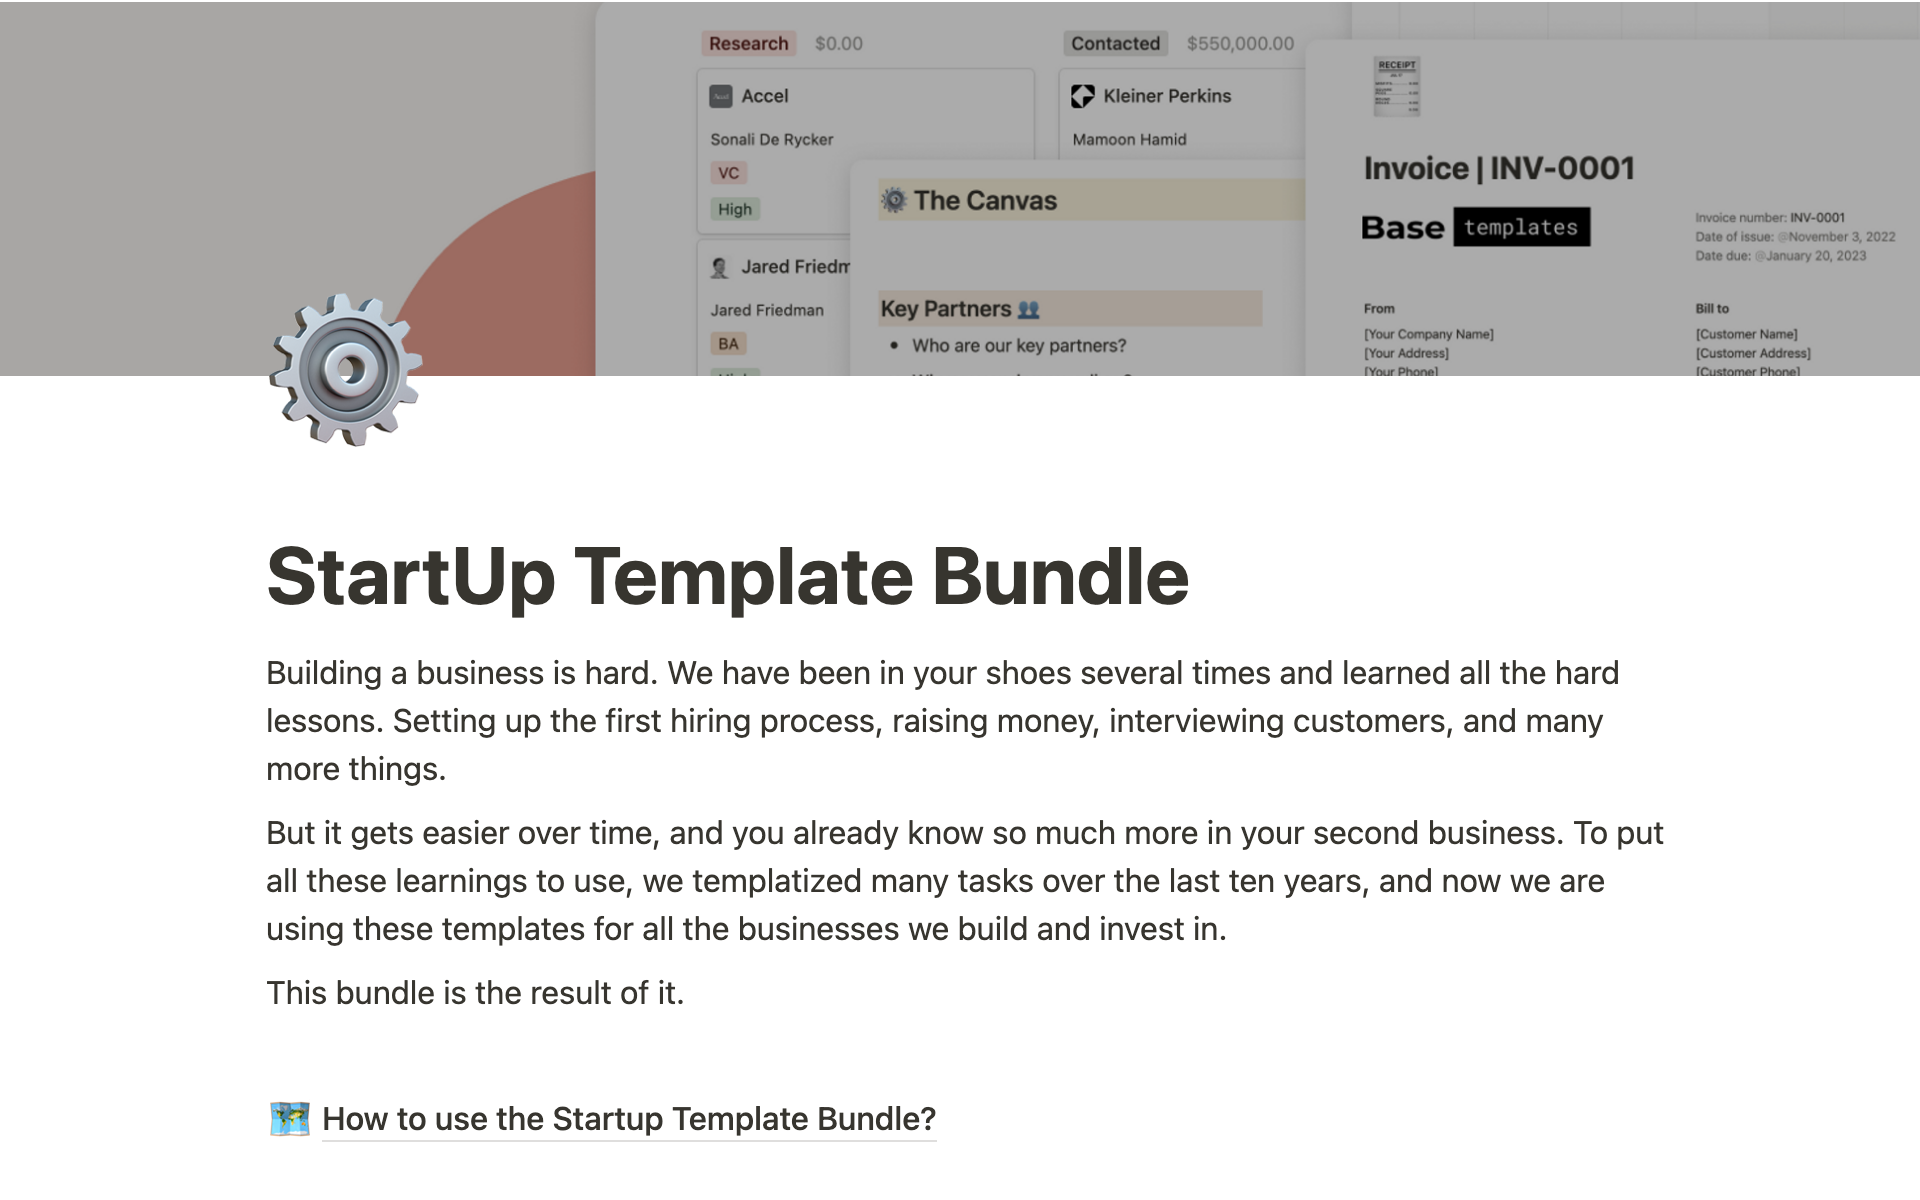 50+ ready-to-use templates to launch & grow your business